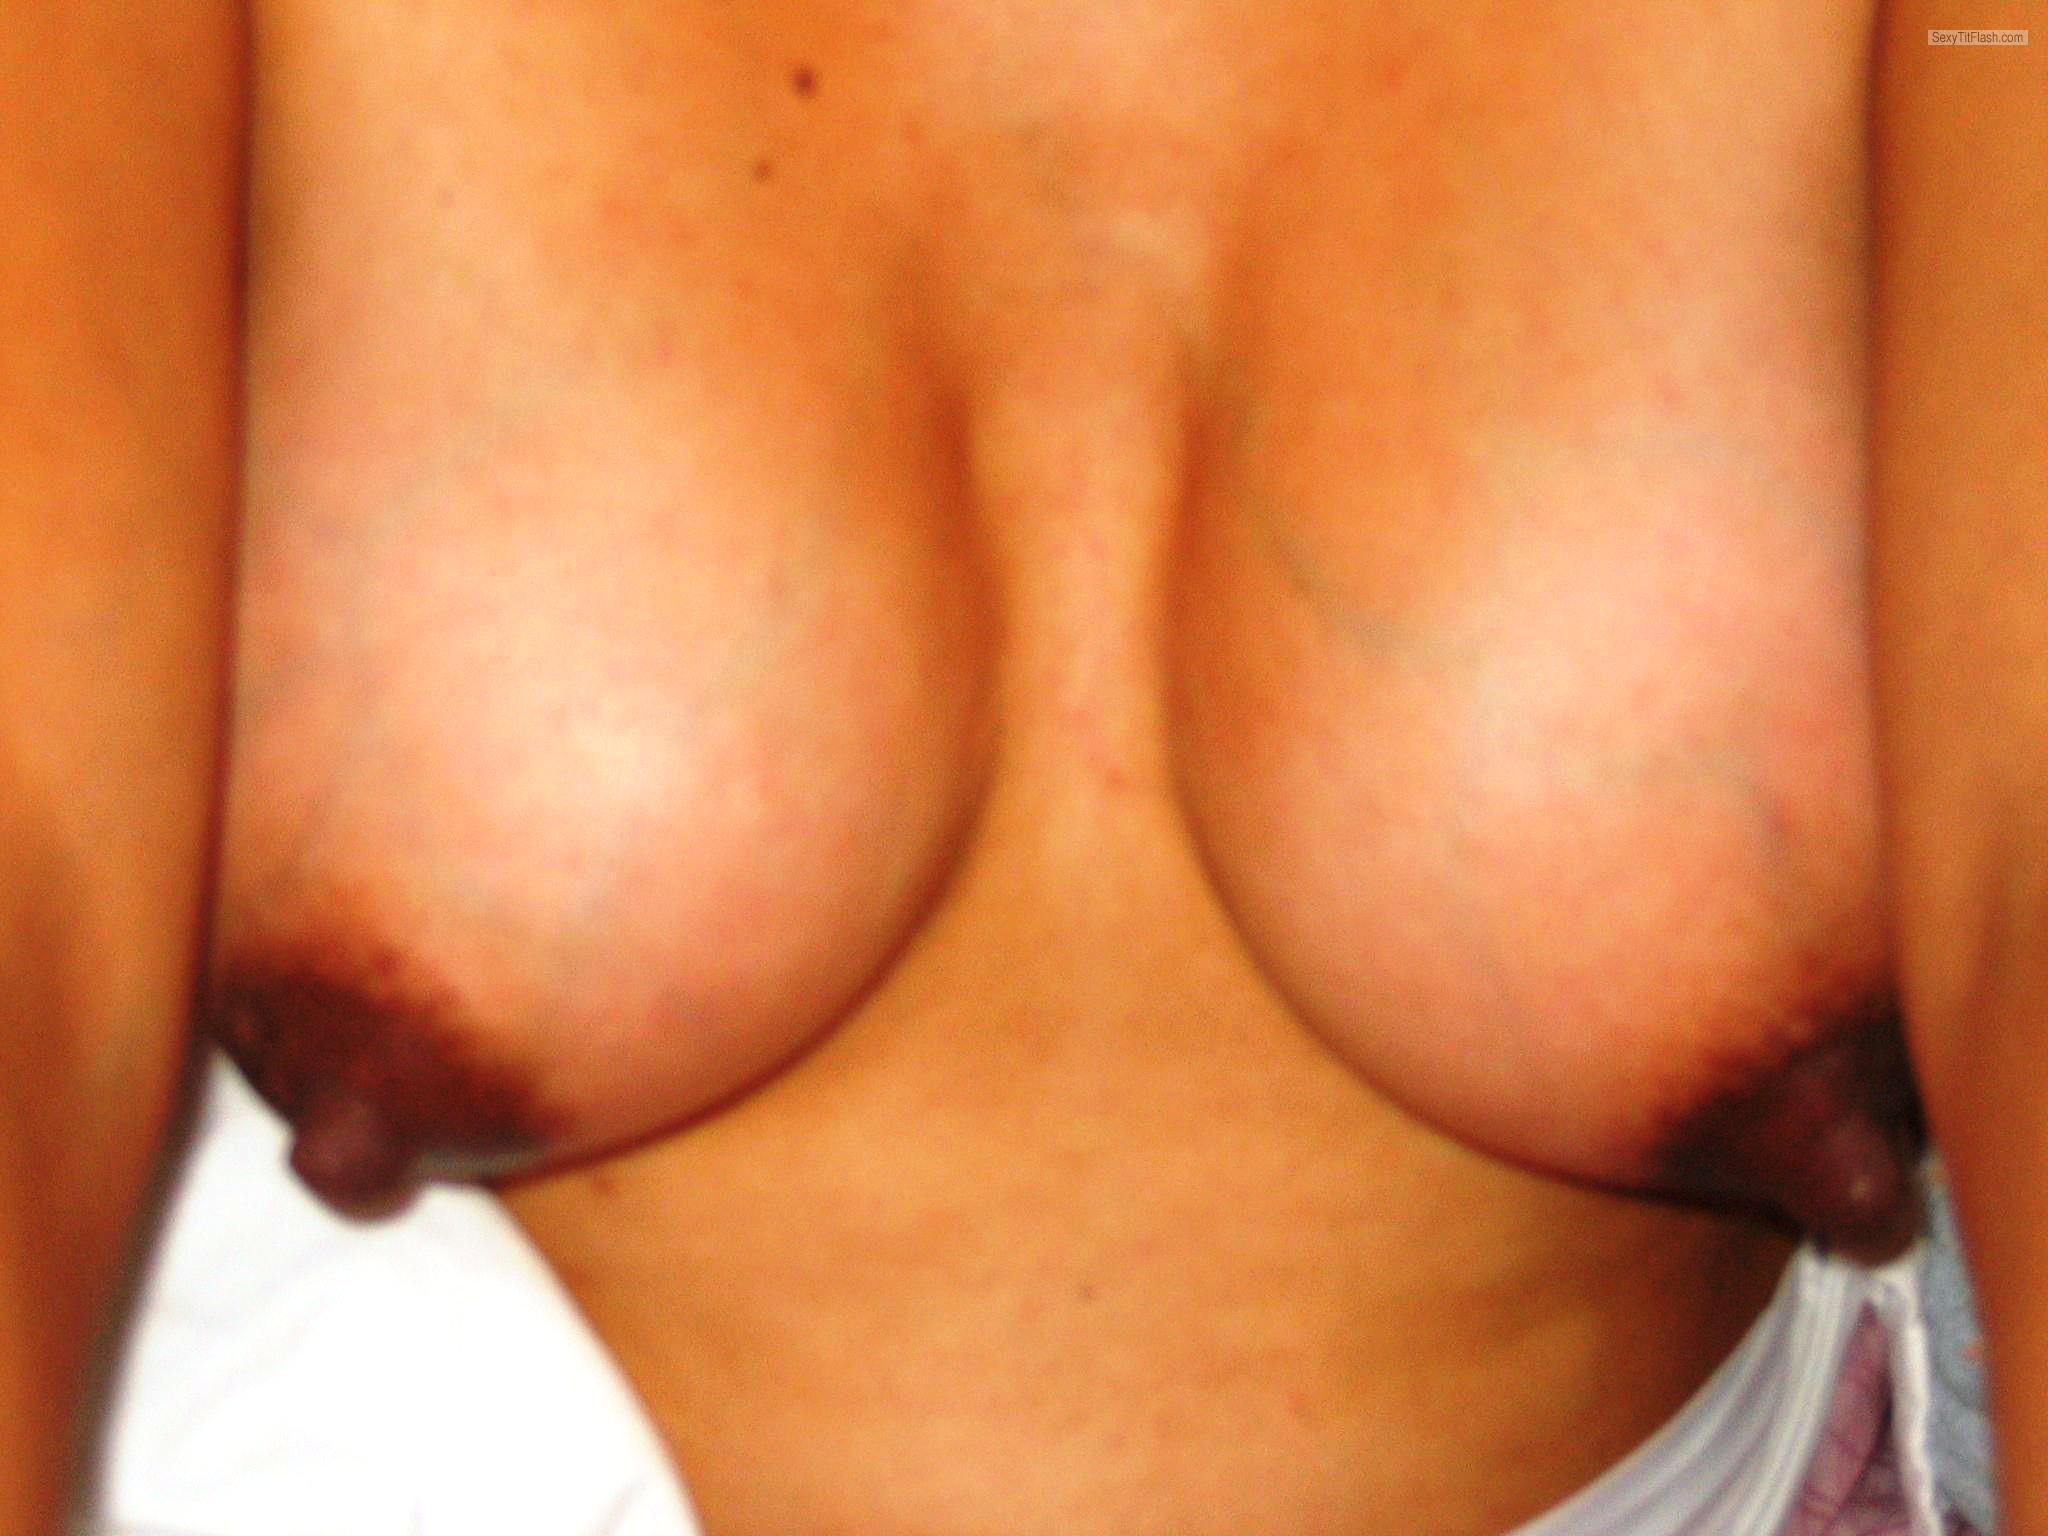 Tit Flash: Wife's Tanlined Medium Tits - Bonobo from United States